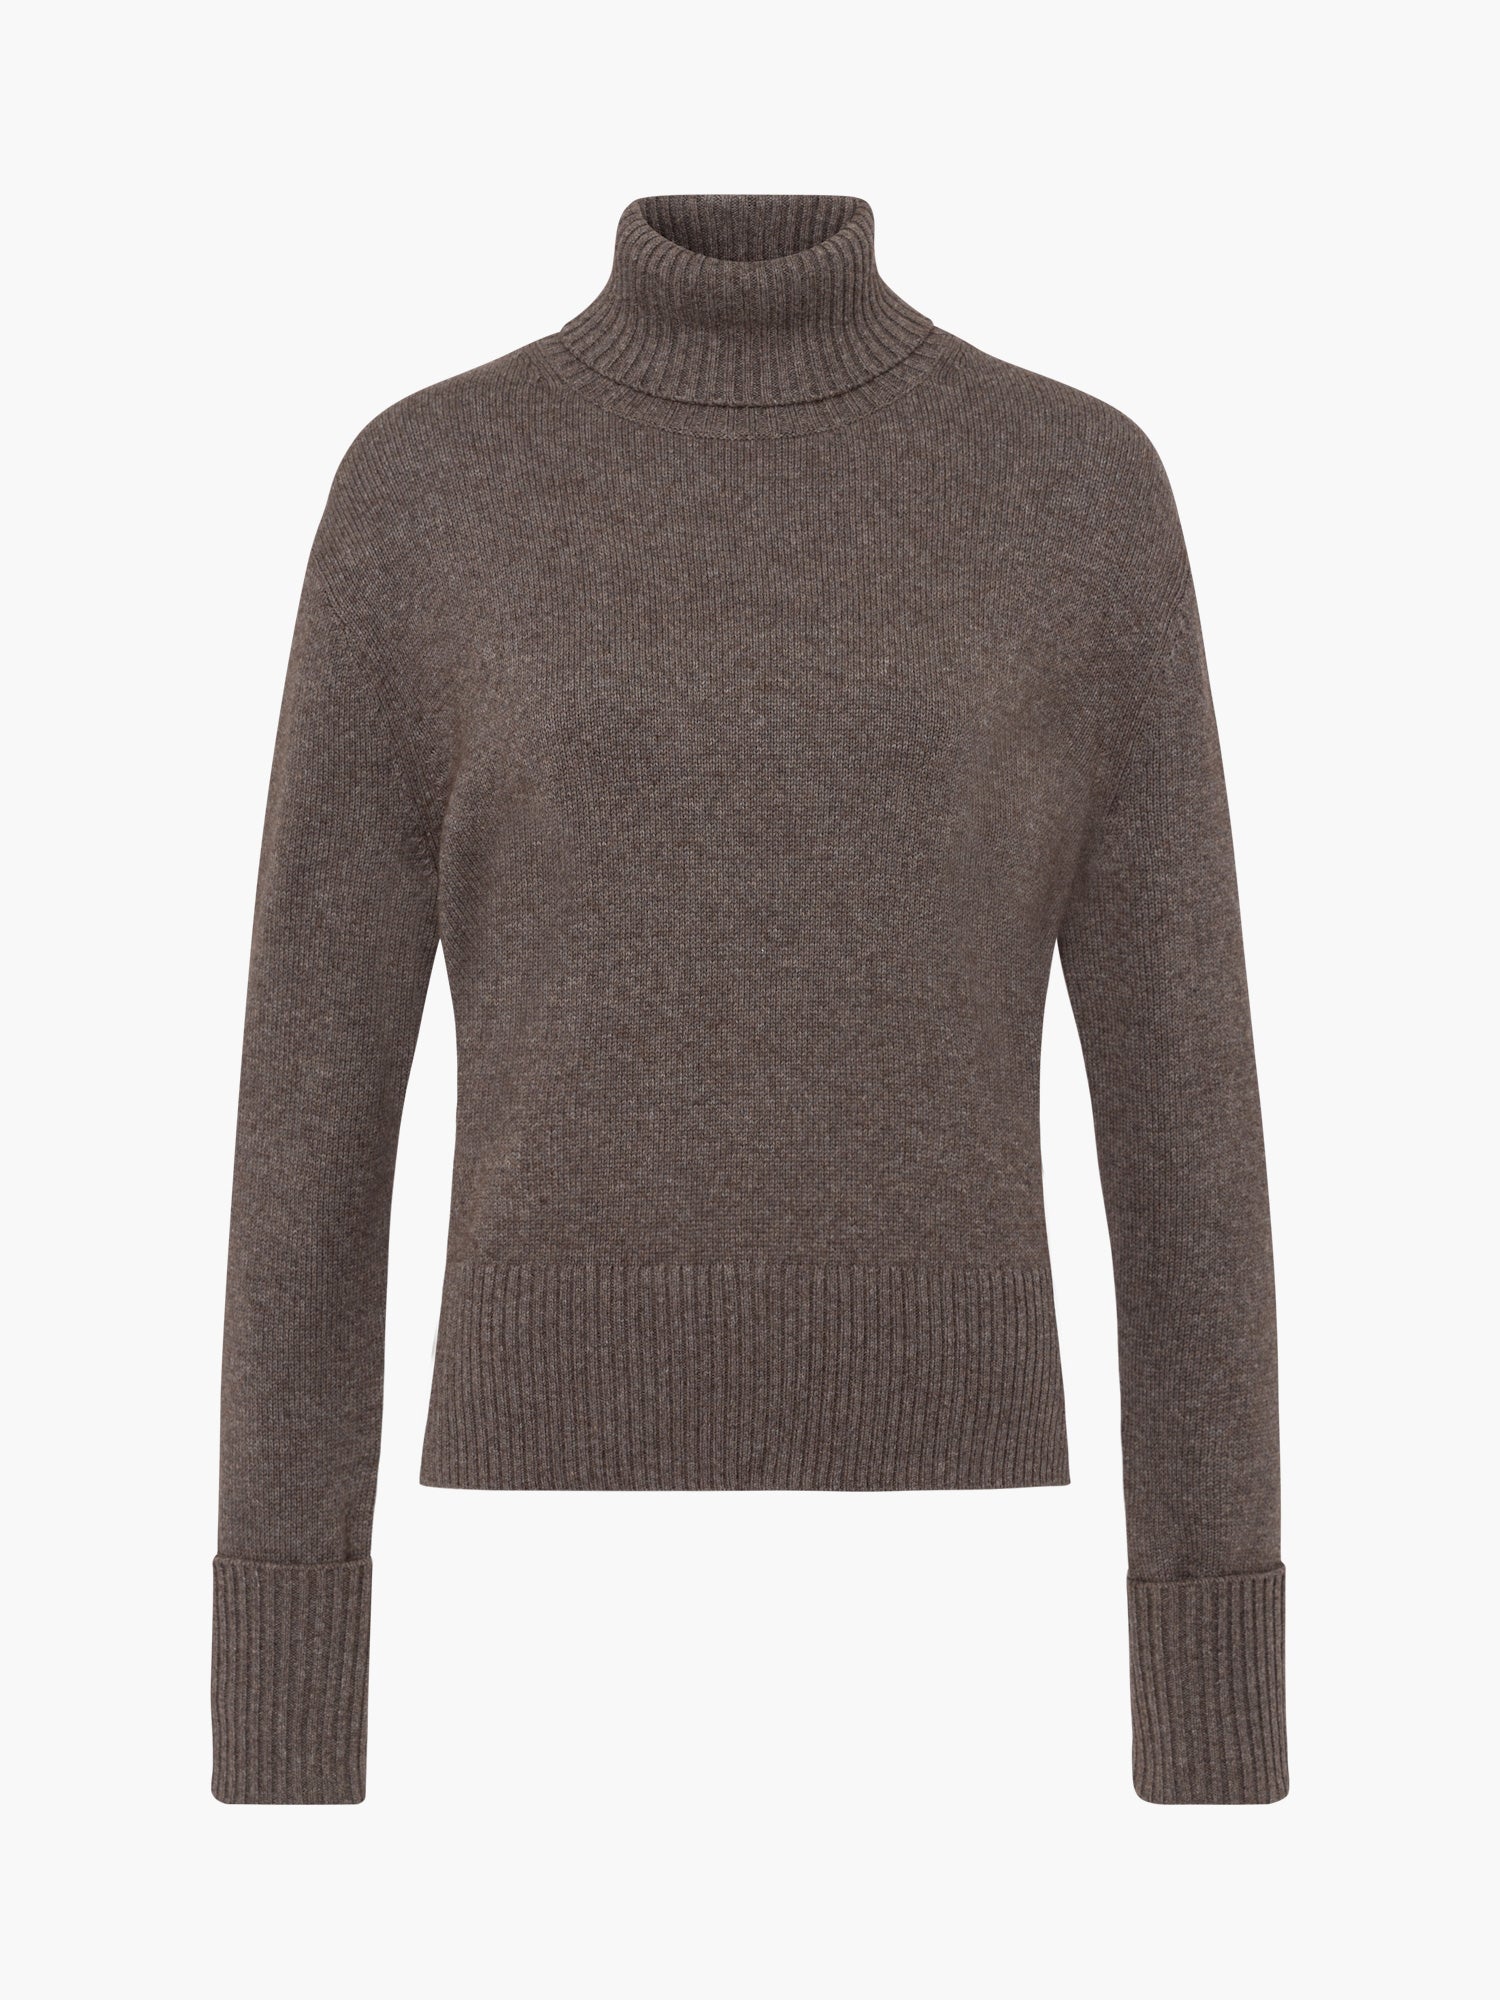 FTC-Cashmere-OUTLET-SALE-Pullover-Rollneck-Strick-ARCHIVE-COLLECTION_ba4bb25c-c557-493f-963c-4b33f05a3ff3.jpg